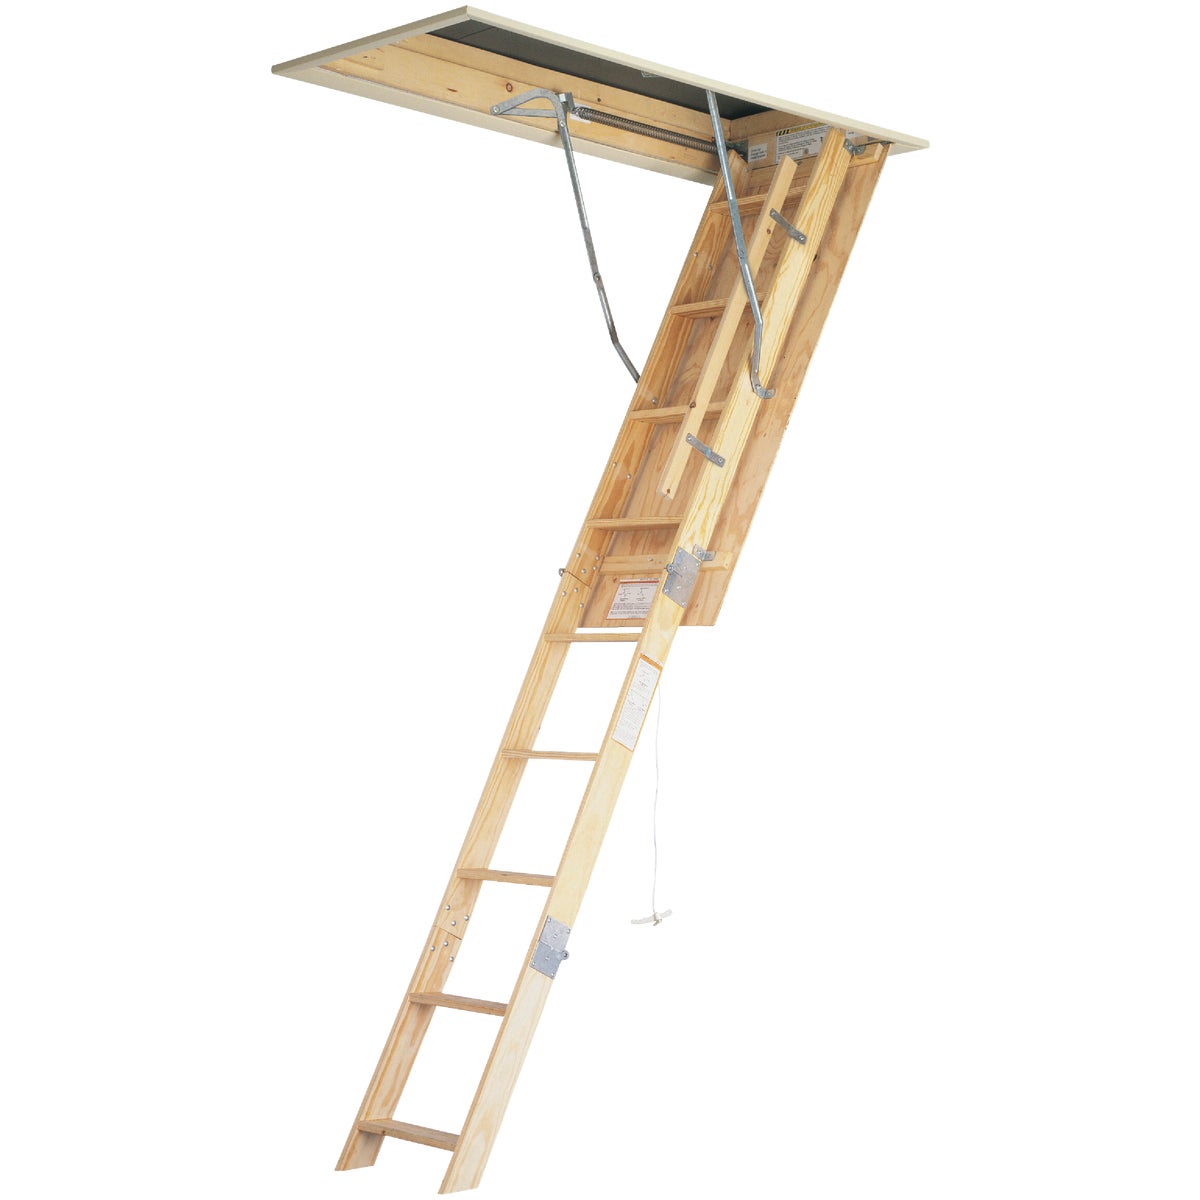 Werner W Series 7 Ft. to 8 Ft. 9 In. 25 In. x 54 In. Wood Attic Ladder, 250 Lb. Load